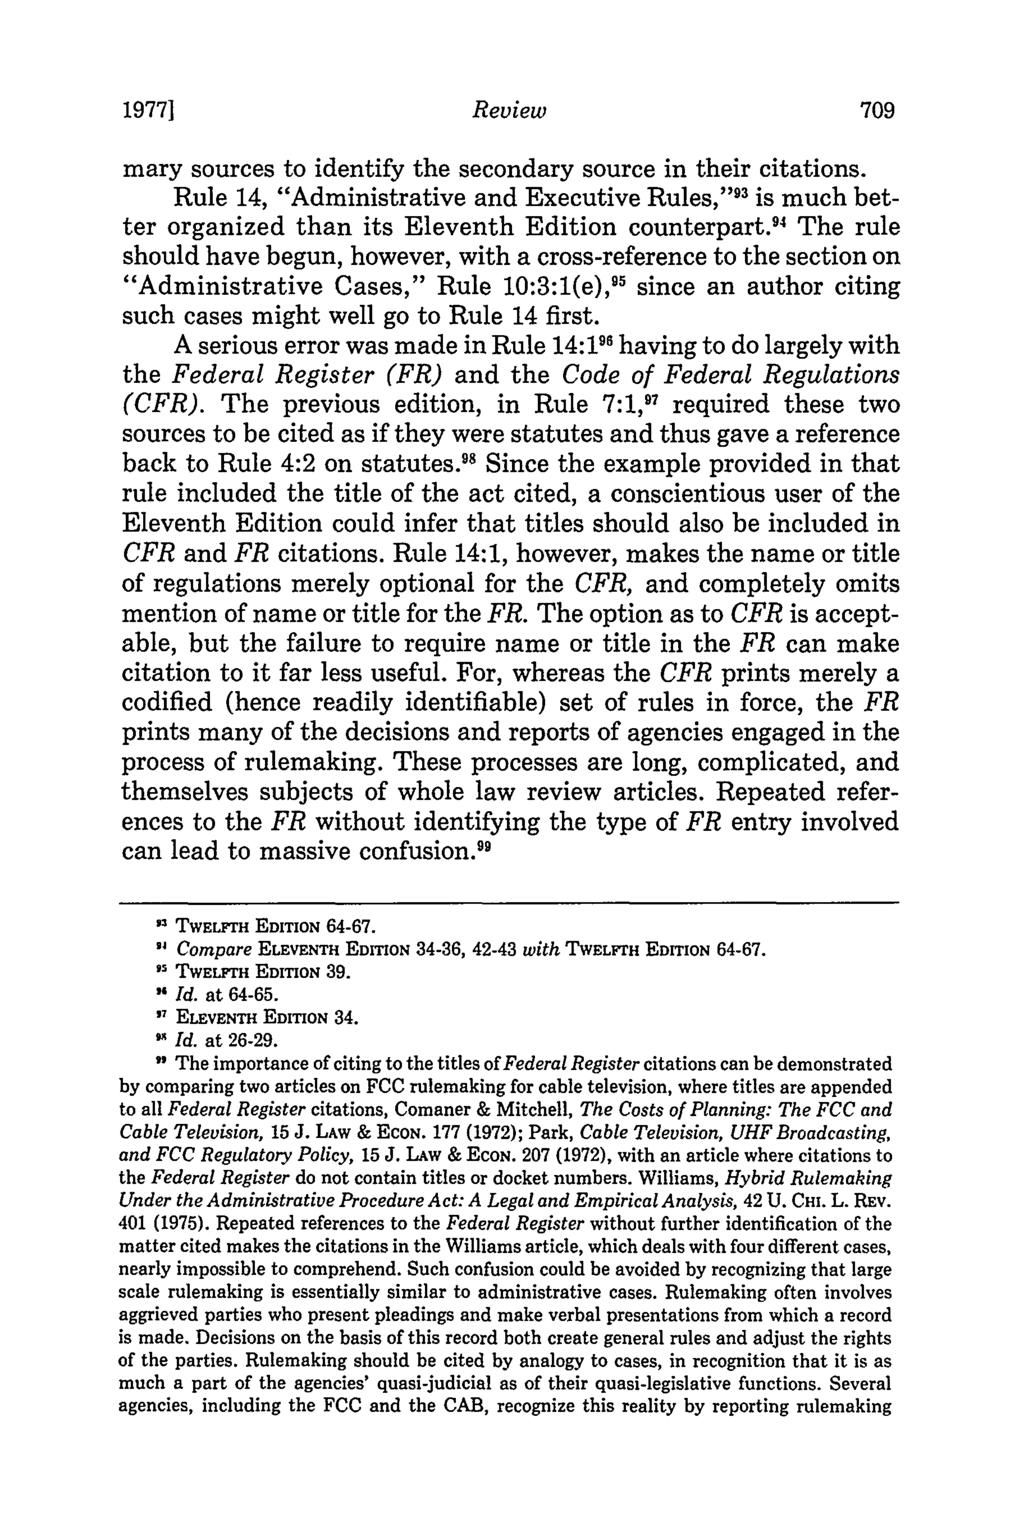 19771 Review mary sources to identify the secondary source in their citations. Rule 14, "Administrative and Executive Rules, 9' 3 is much better organized than its Eleventh Edition counterpart.